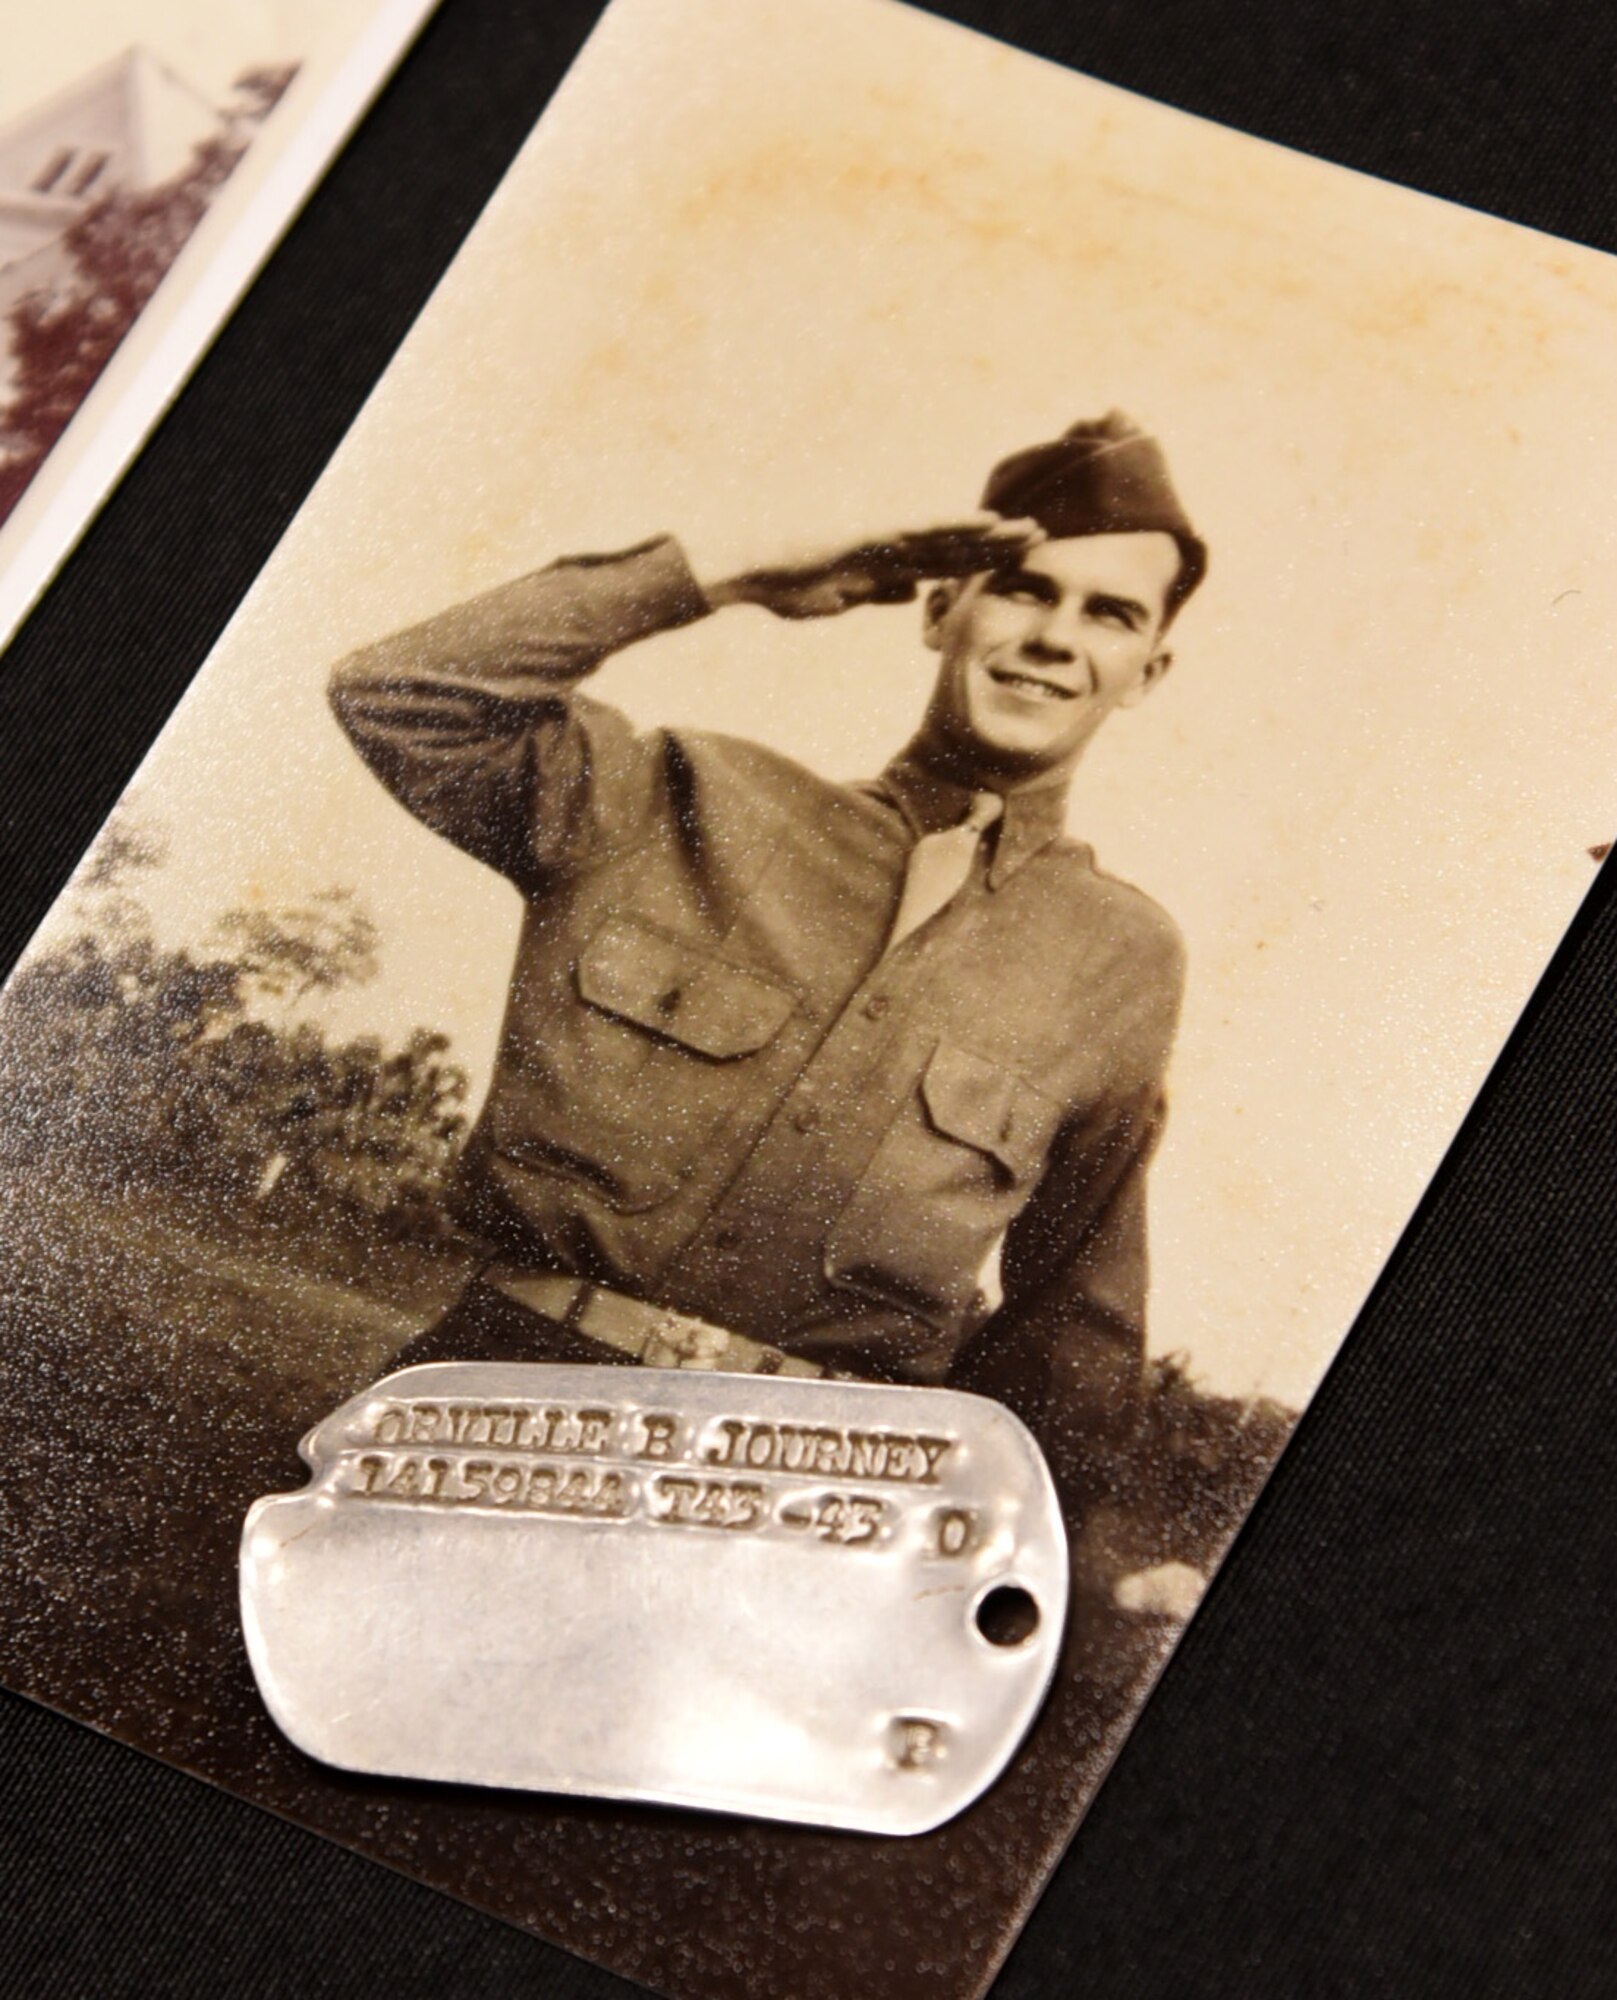 An image of TSgt. Bruce Journey during his time in service, with his recently returned dog tags